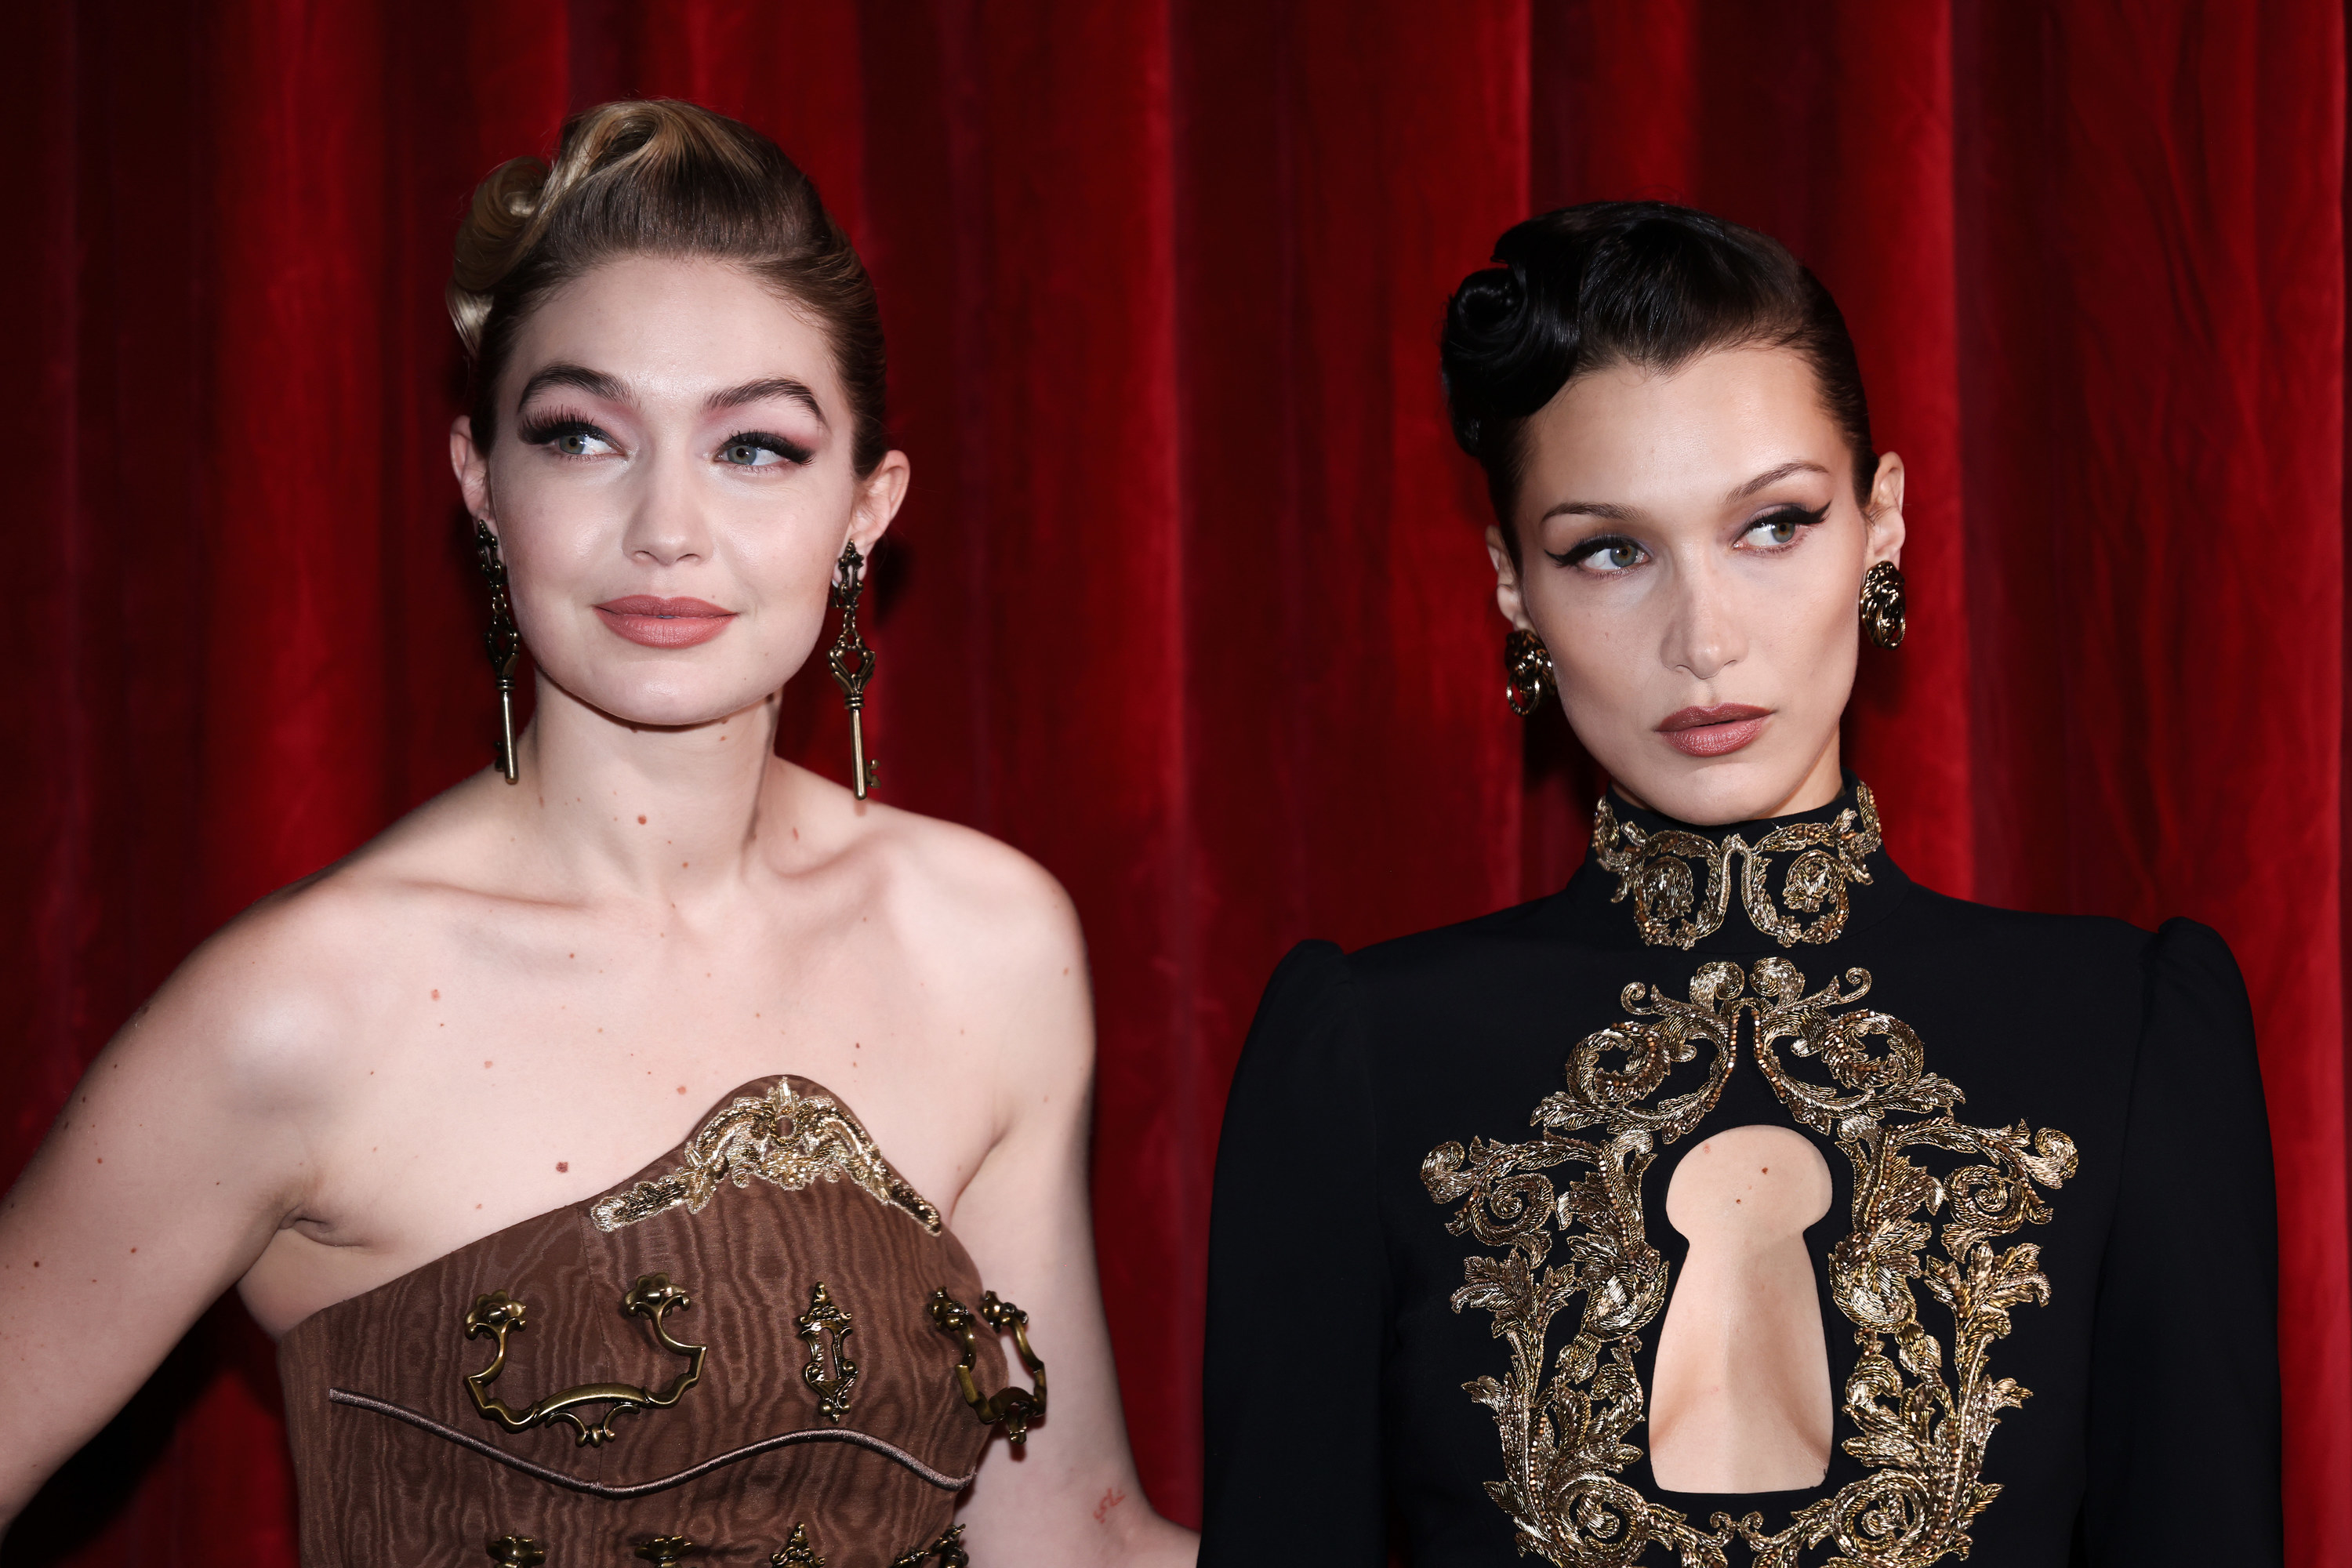 Gigi and Bella Hadid in evening gowns and large earrings with their hair styled up